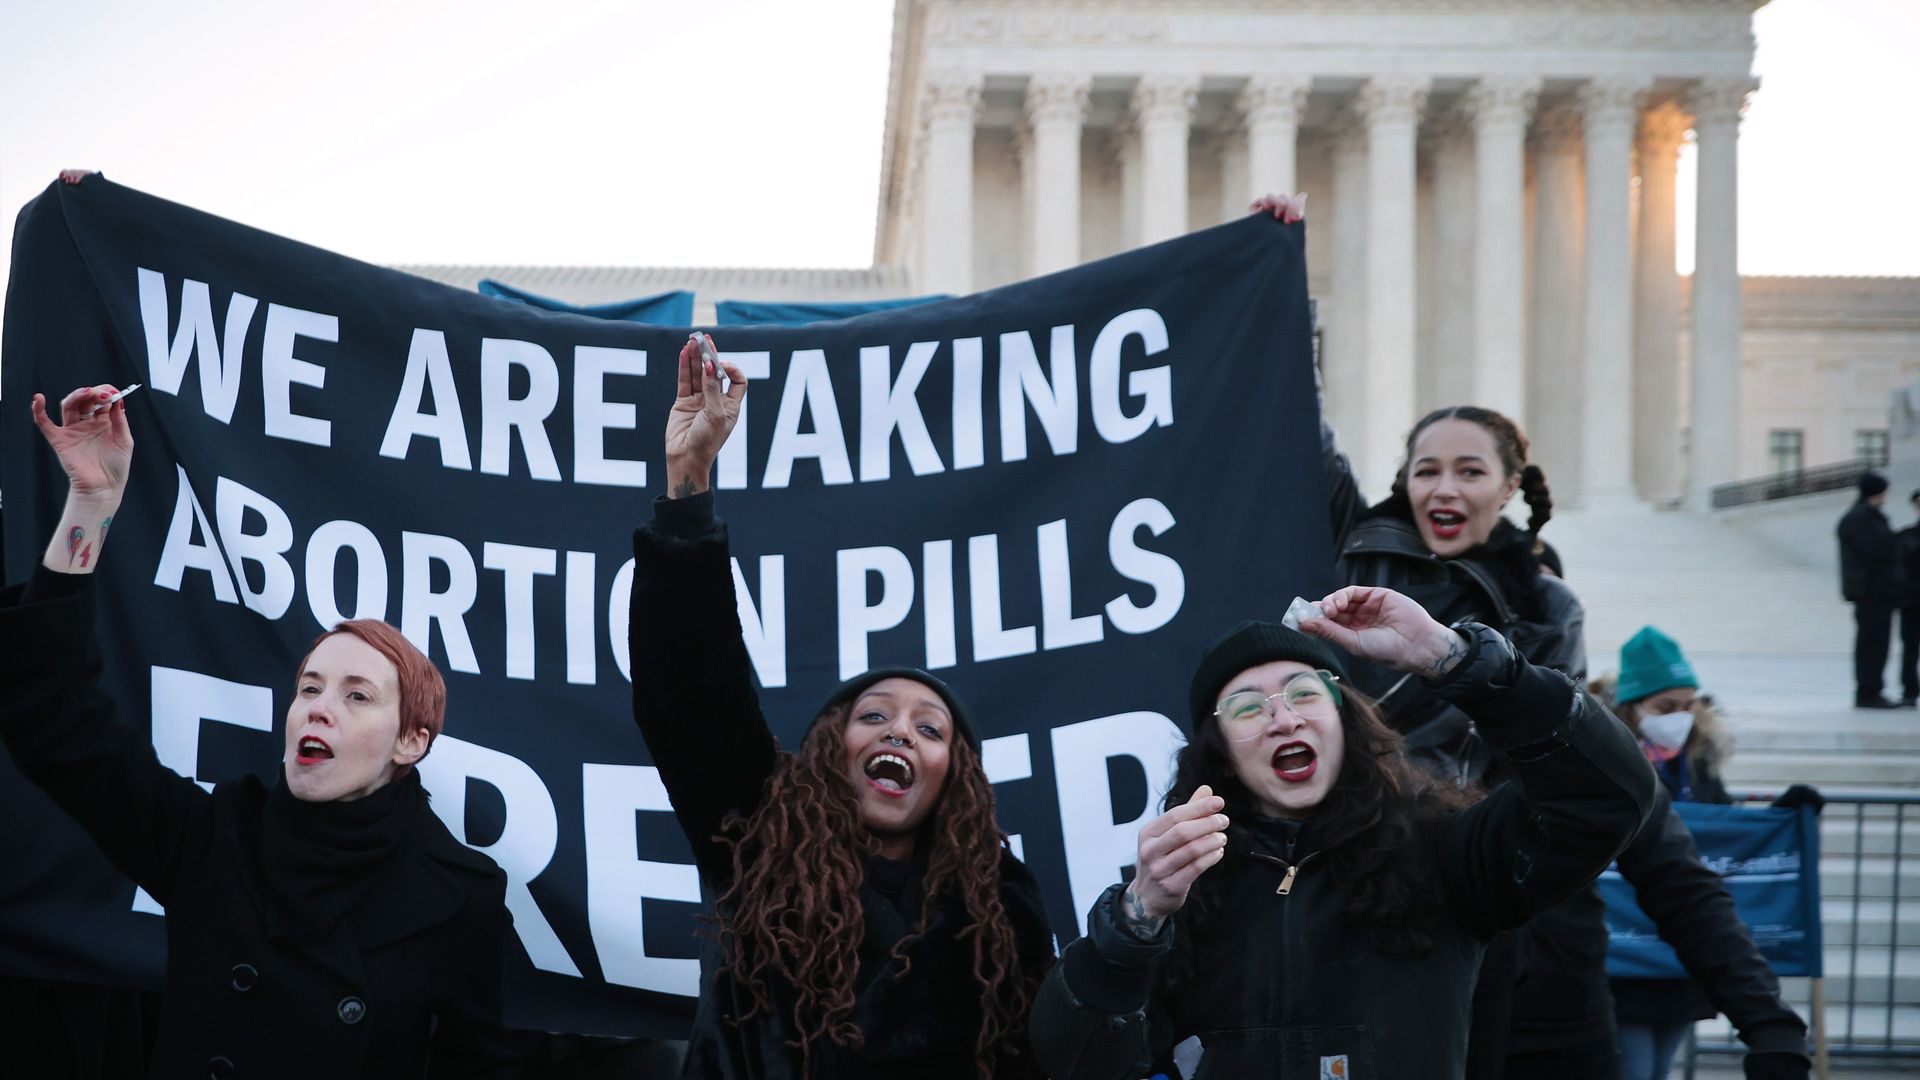 Picture of activists taking abortion pills in front of the Supreme Court building